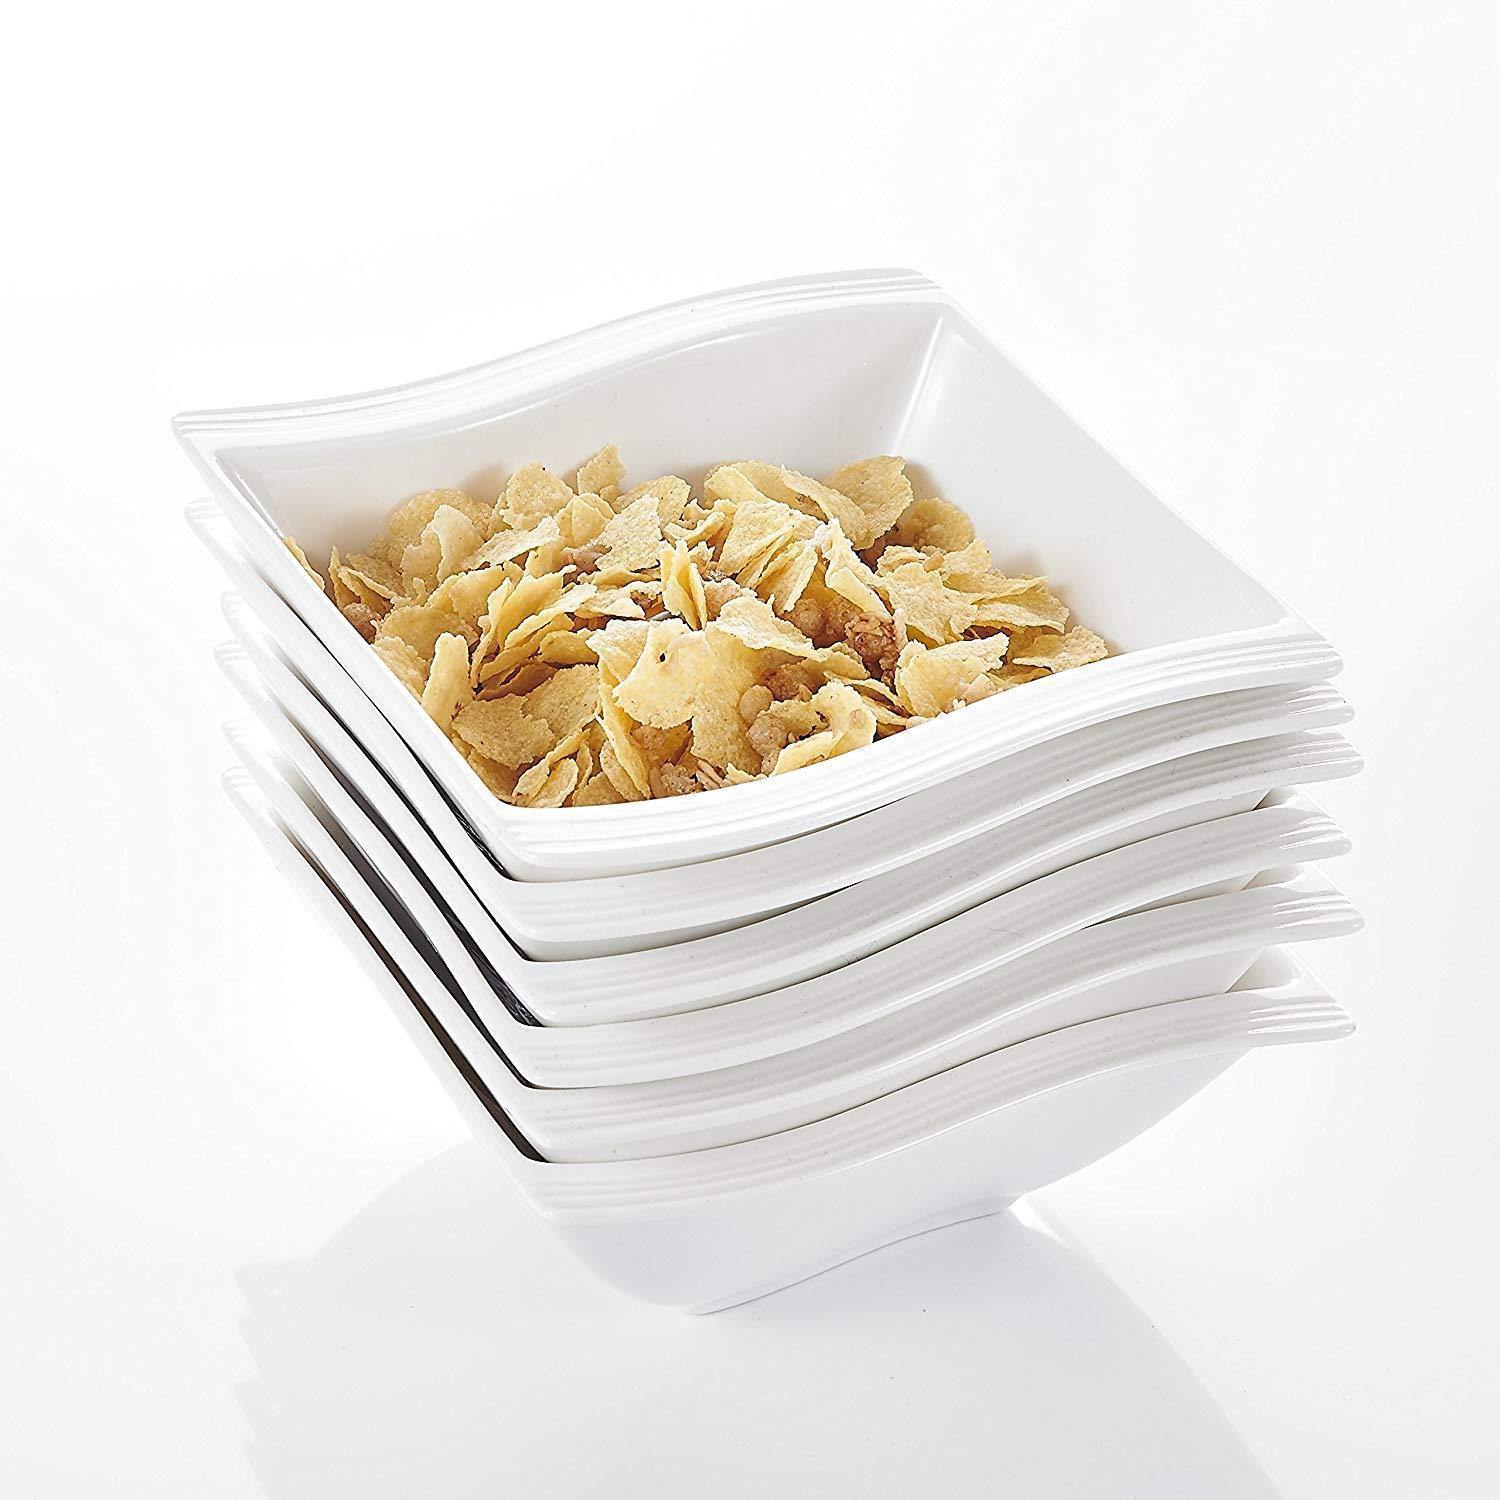 18-pieces White Porcelain Square  Bowls Set (12 ounce) - Nordic Side - 12, 18, Bowl, Bowls, Breakfast, Cereal, Dinner, Dinnerware, Household, MALACASA, Oatmeal, Ounce, pieces, Porcelain, Sets